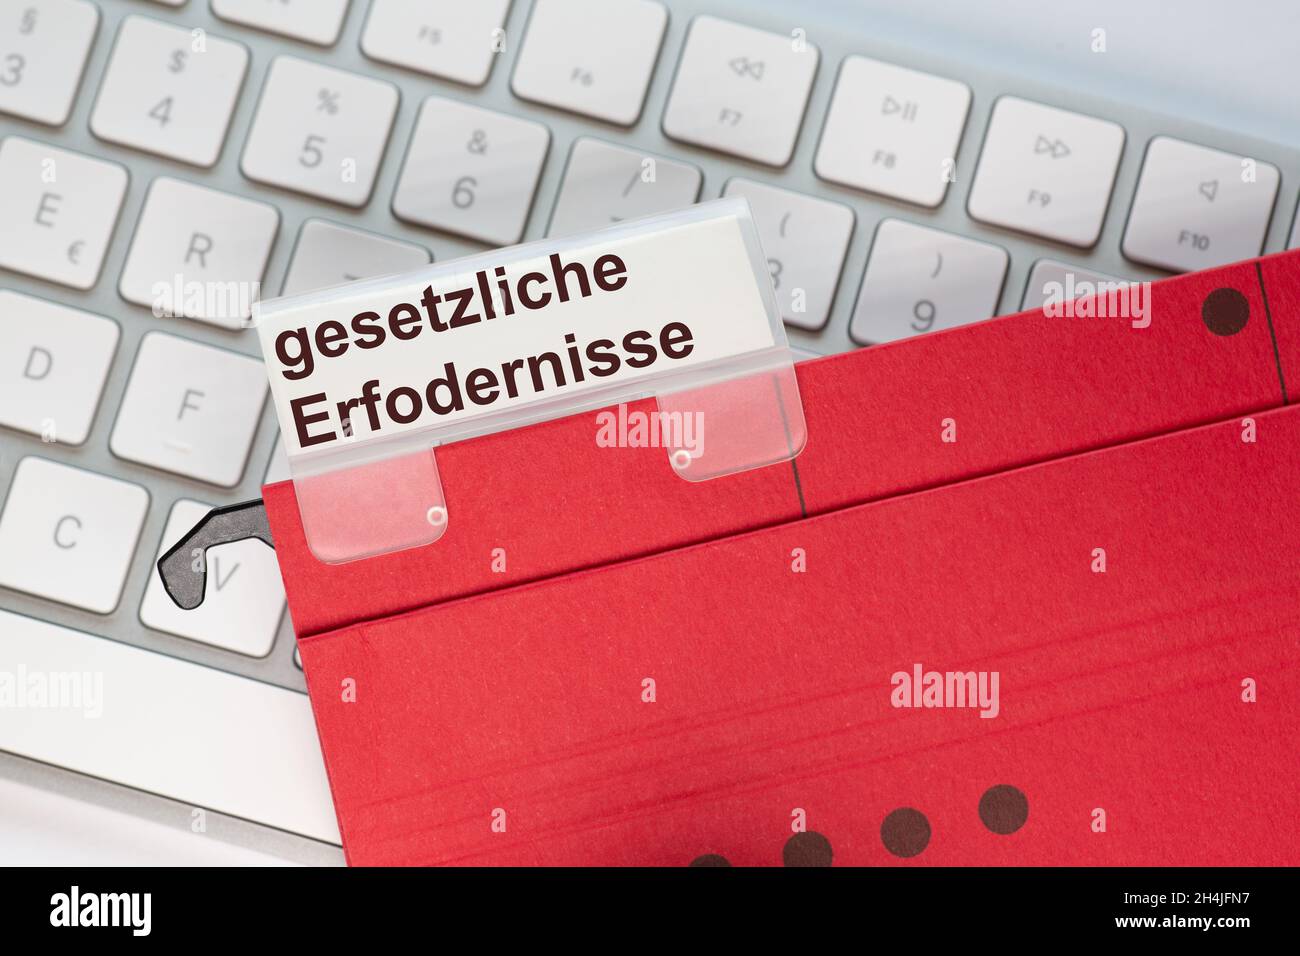 The German words for legal requirements can be seen on the label of a red hanging folder. The hanging folder is on a computer keyboard. Stock Photo